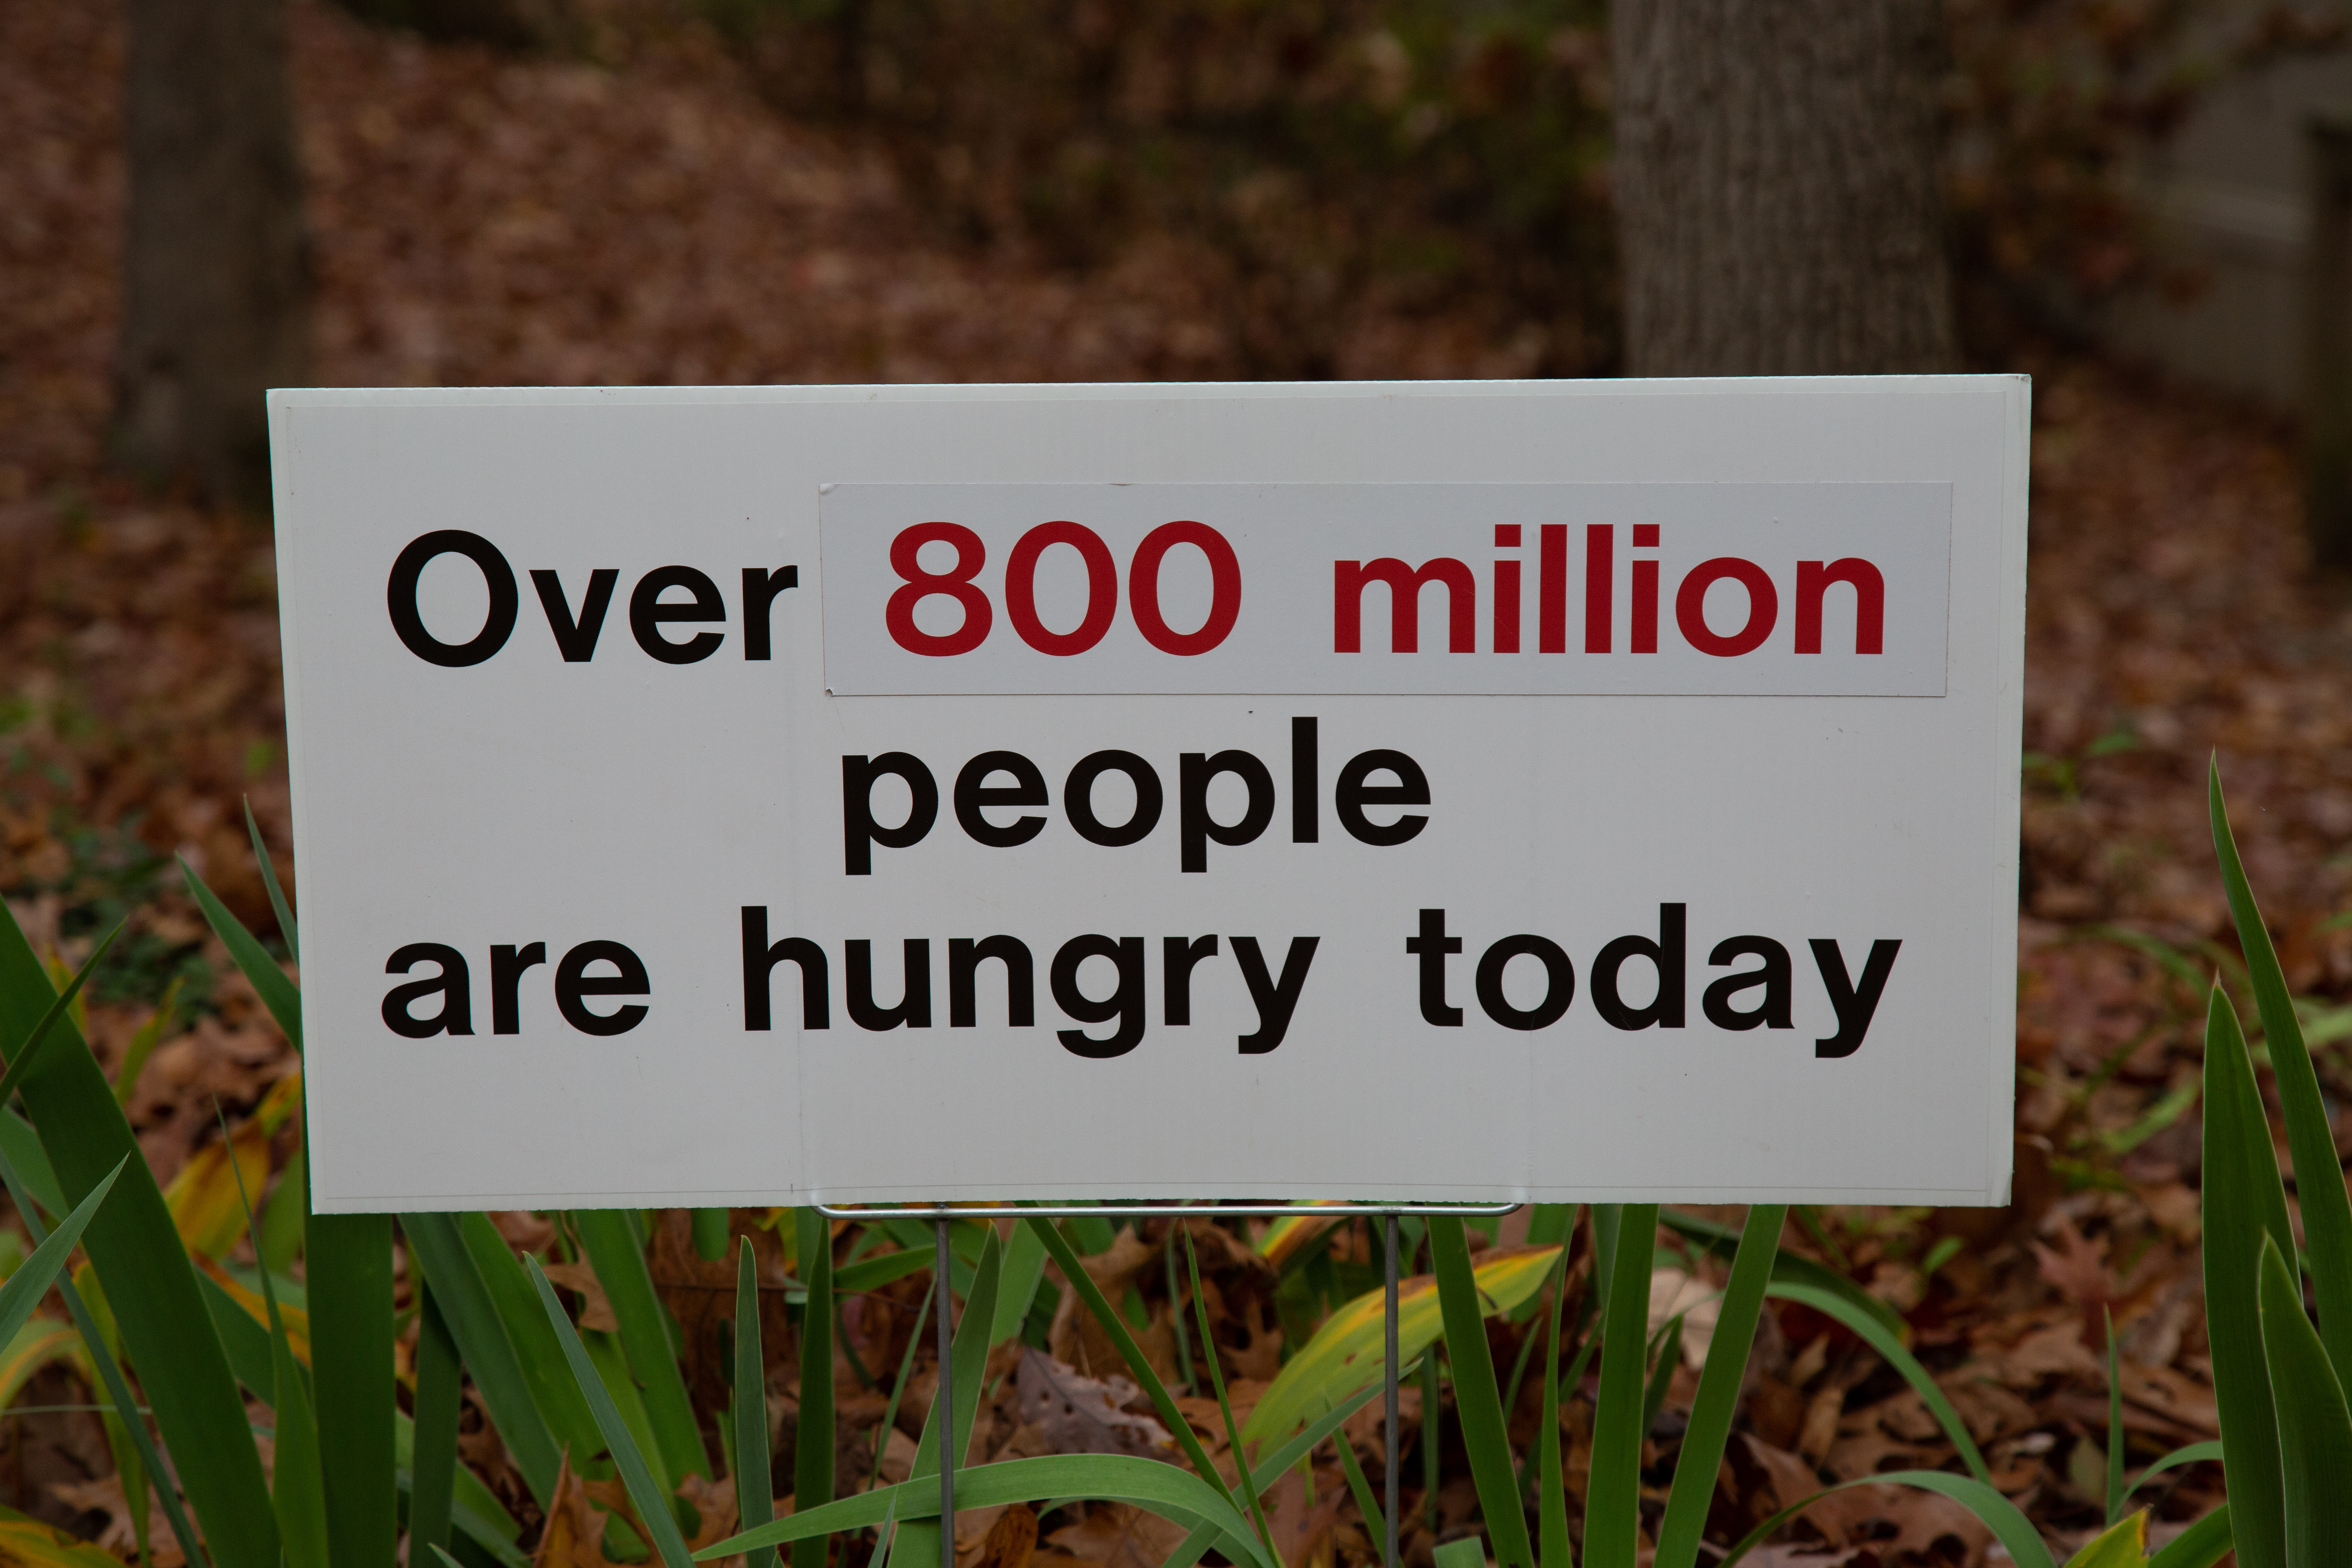 Over 800 million people are hungry today.